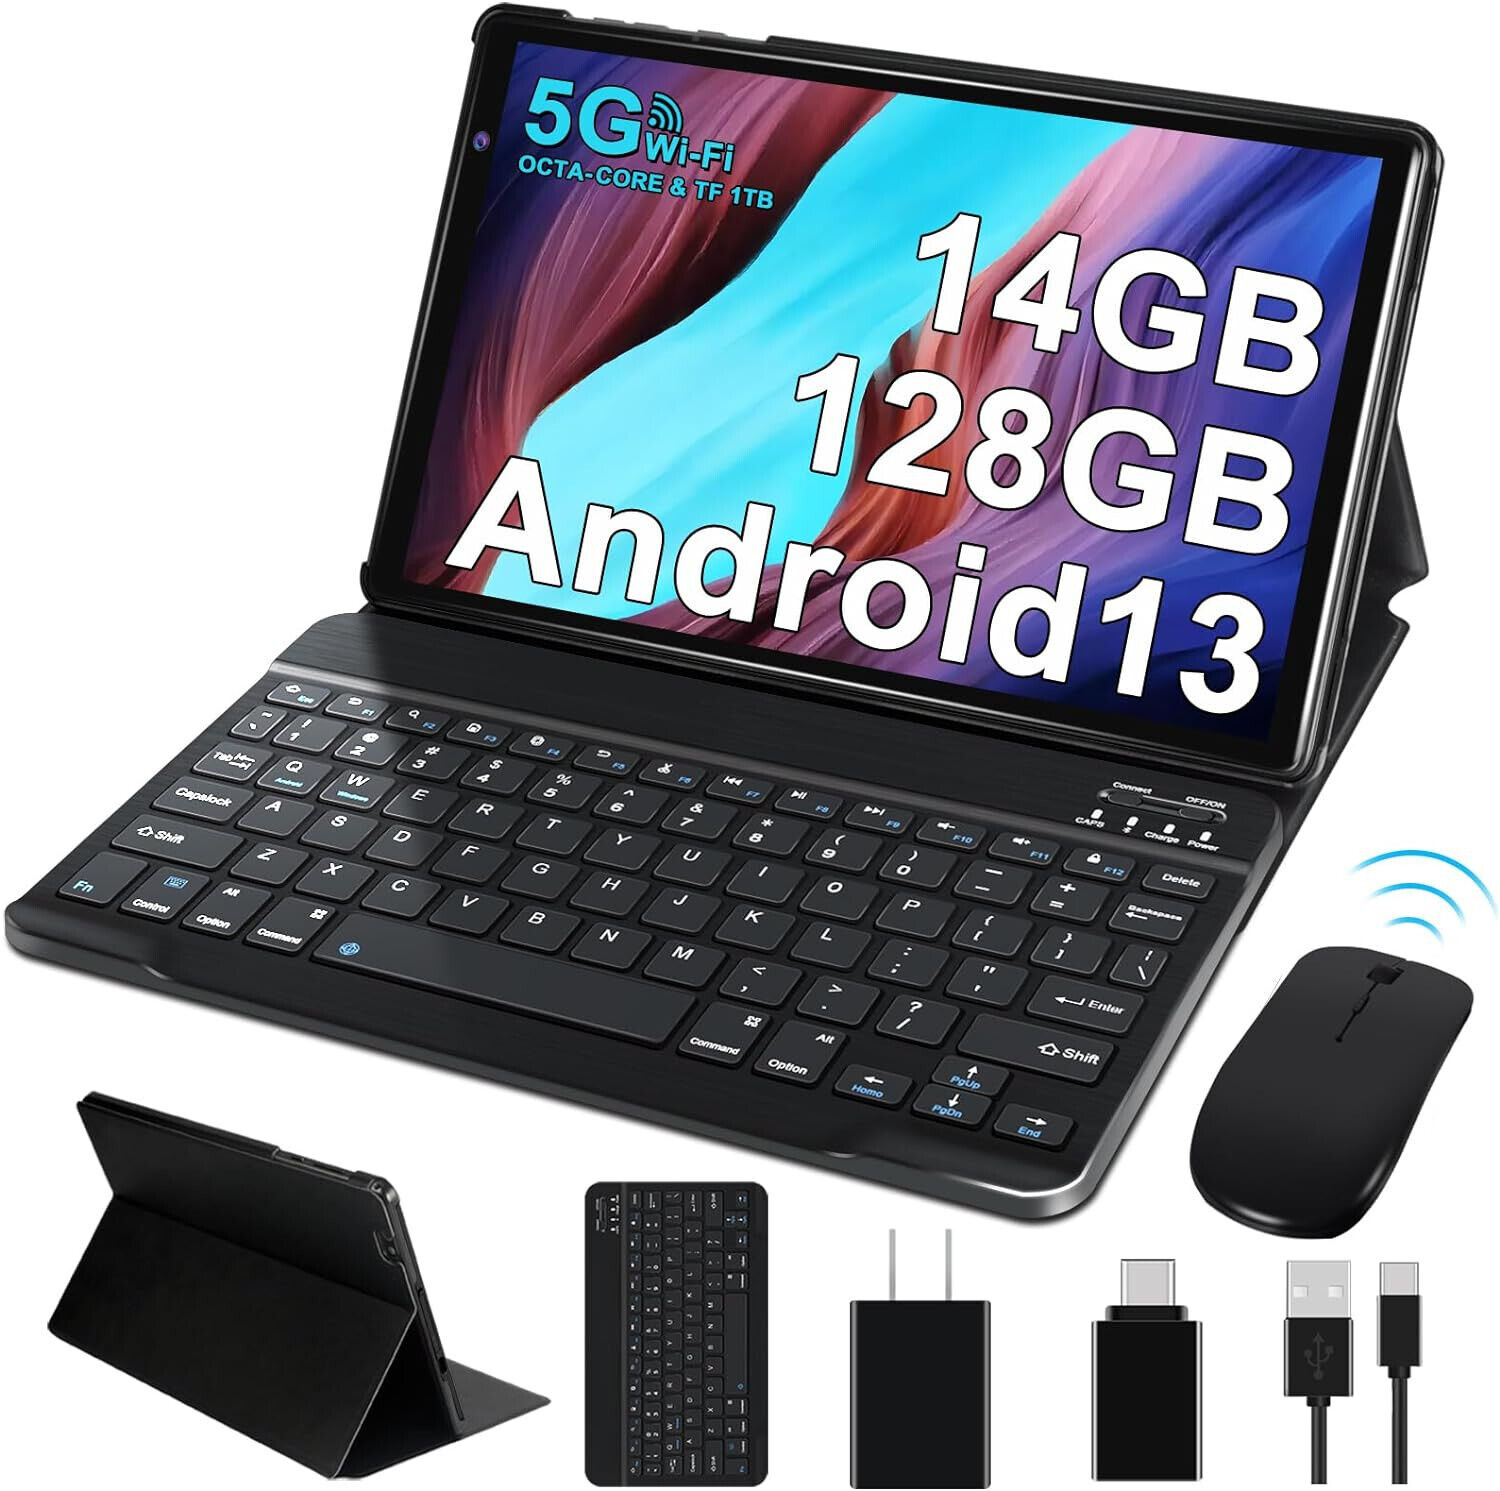 Android 13 Tablet 10 inch Octa-Core 14GB RAM 128GB ROM 5G WiFi, Keyboard & Mouse